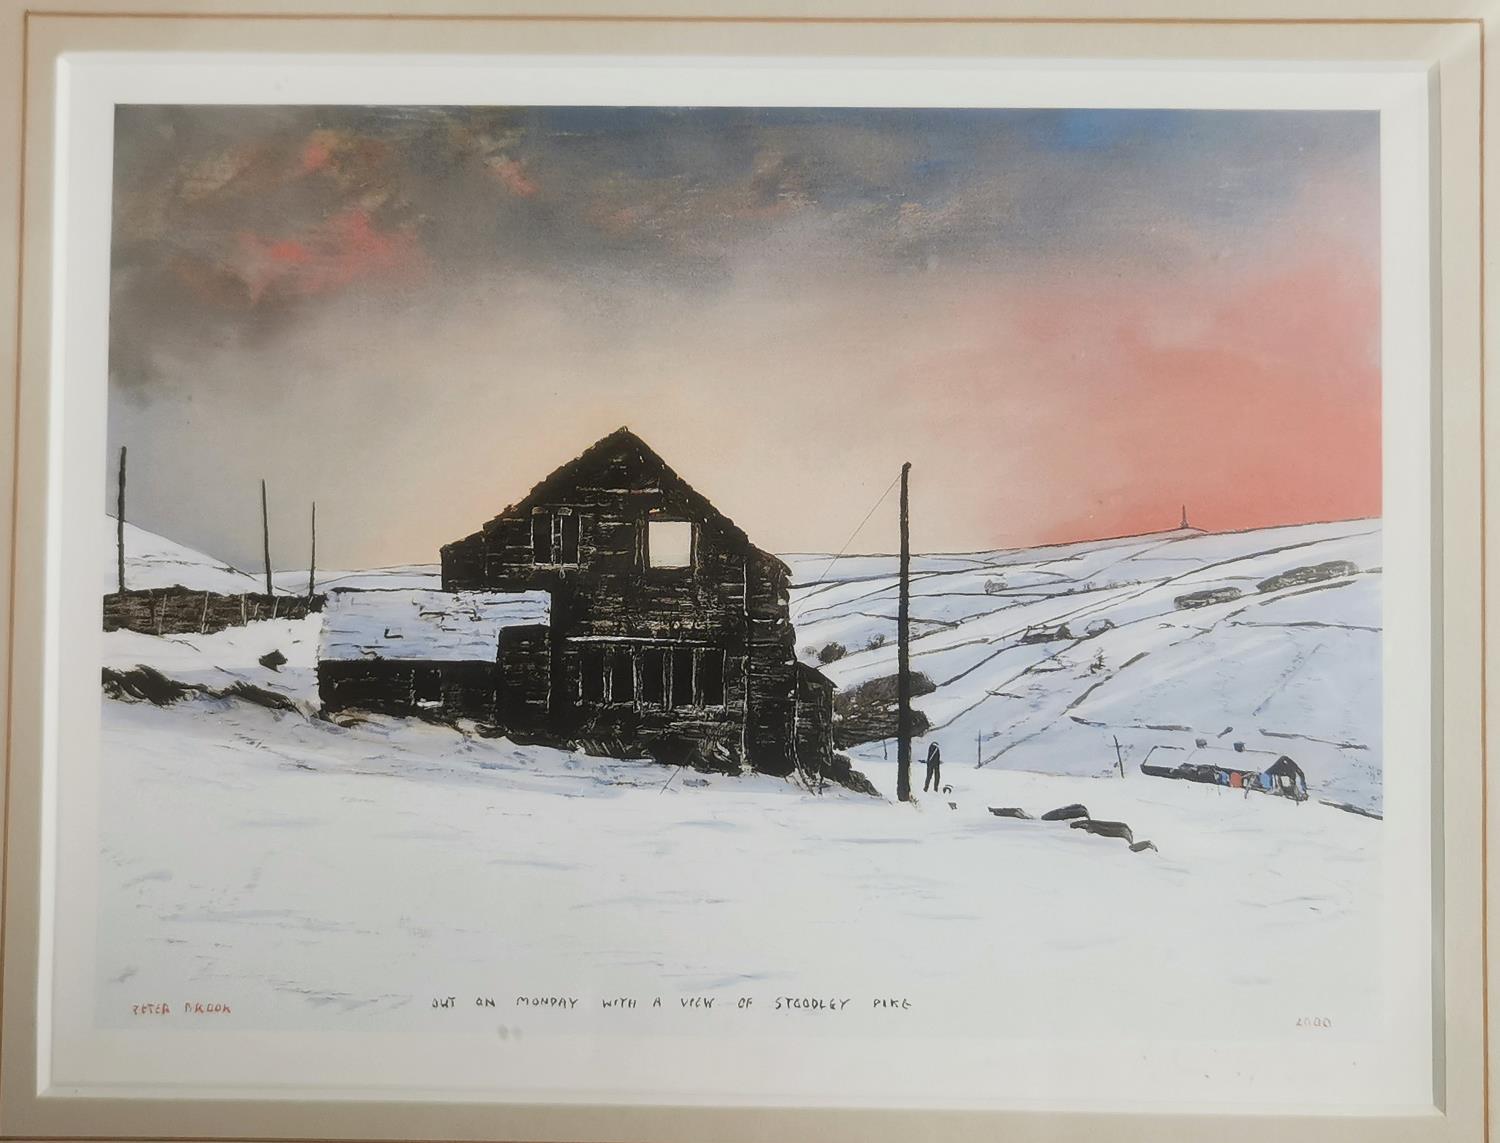 1990's Print by Peter Brook (1927-2009) titled 'Owt on Monday with a View of Stoodley Pike' - measur